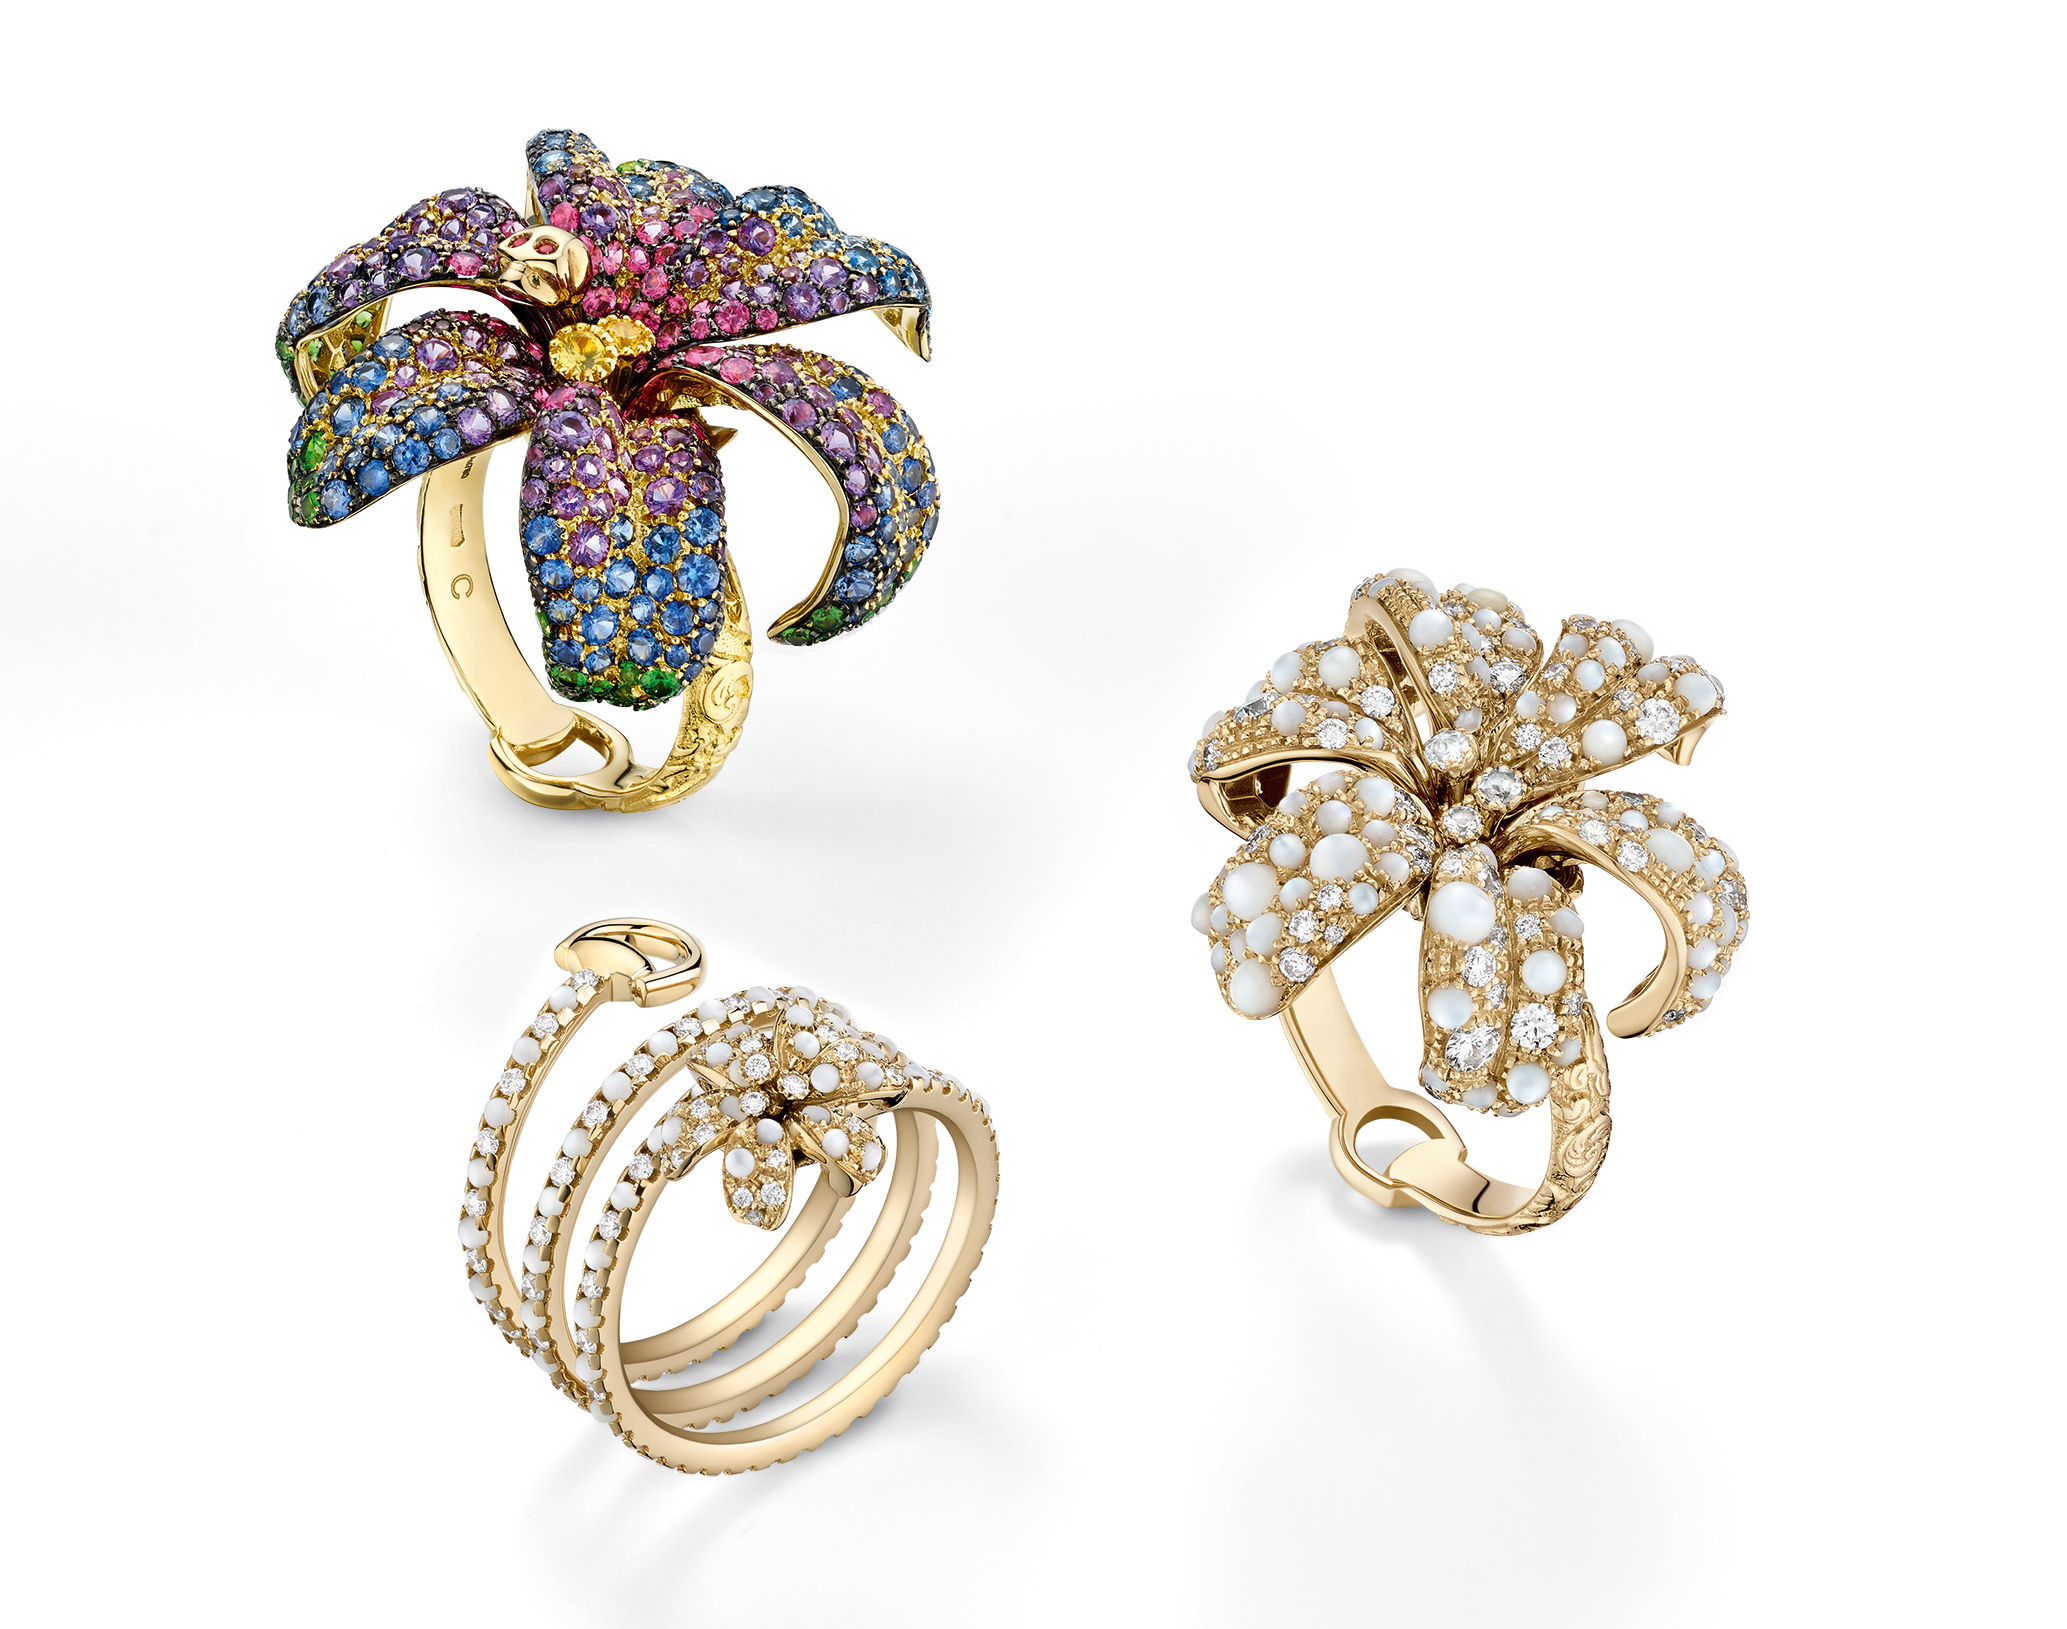 Gucci Flora rings